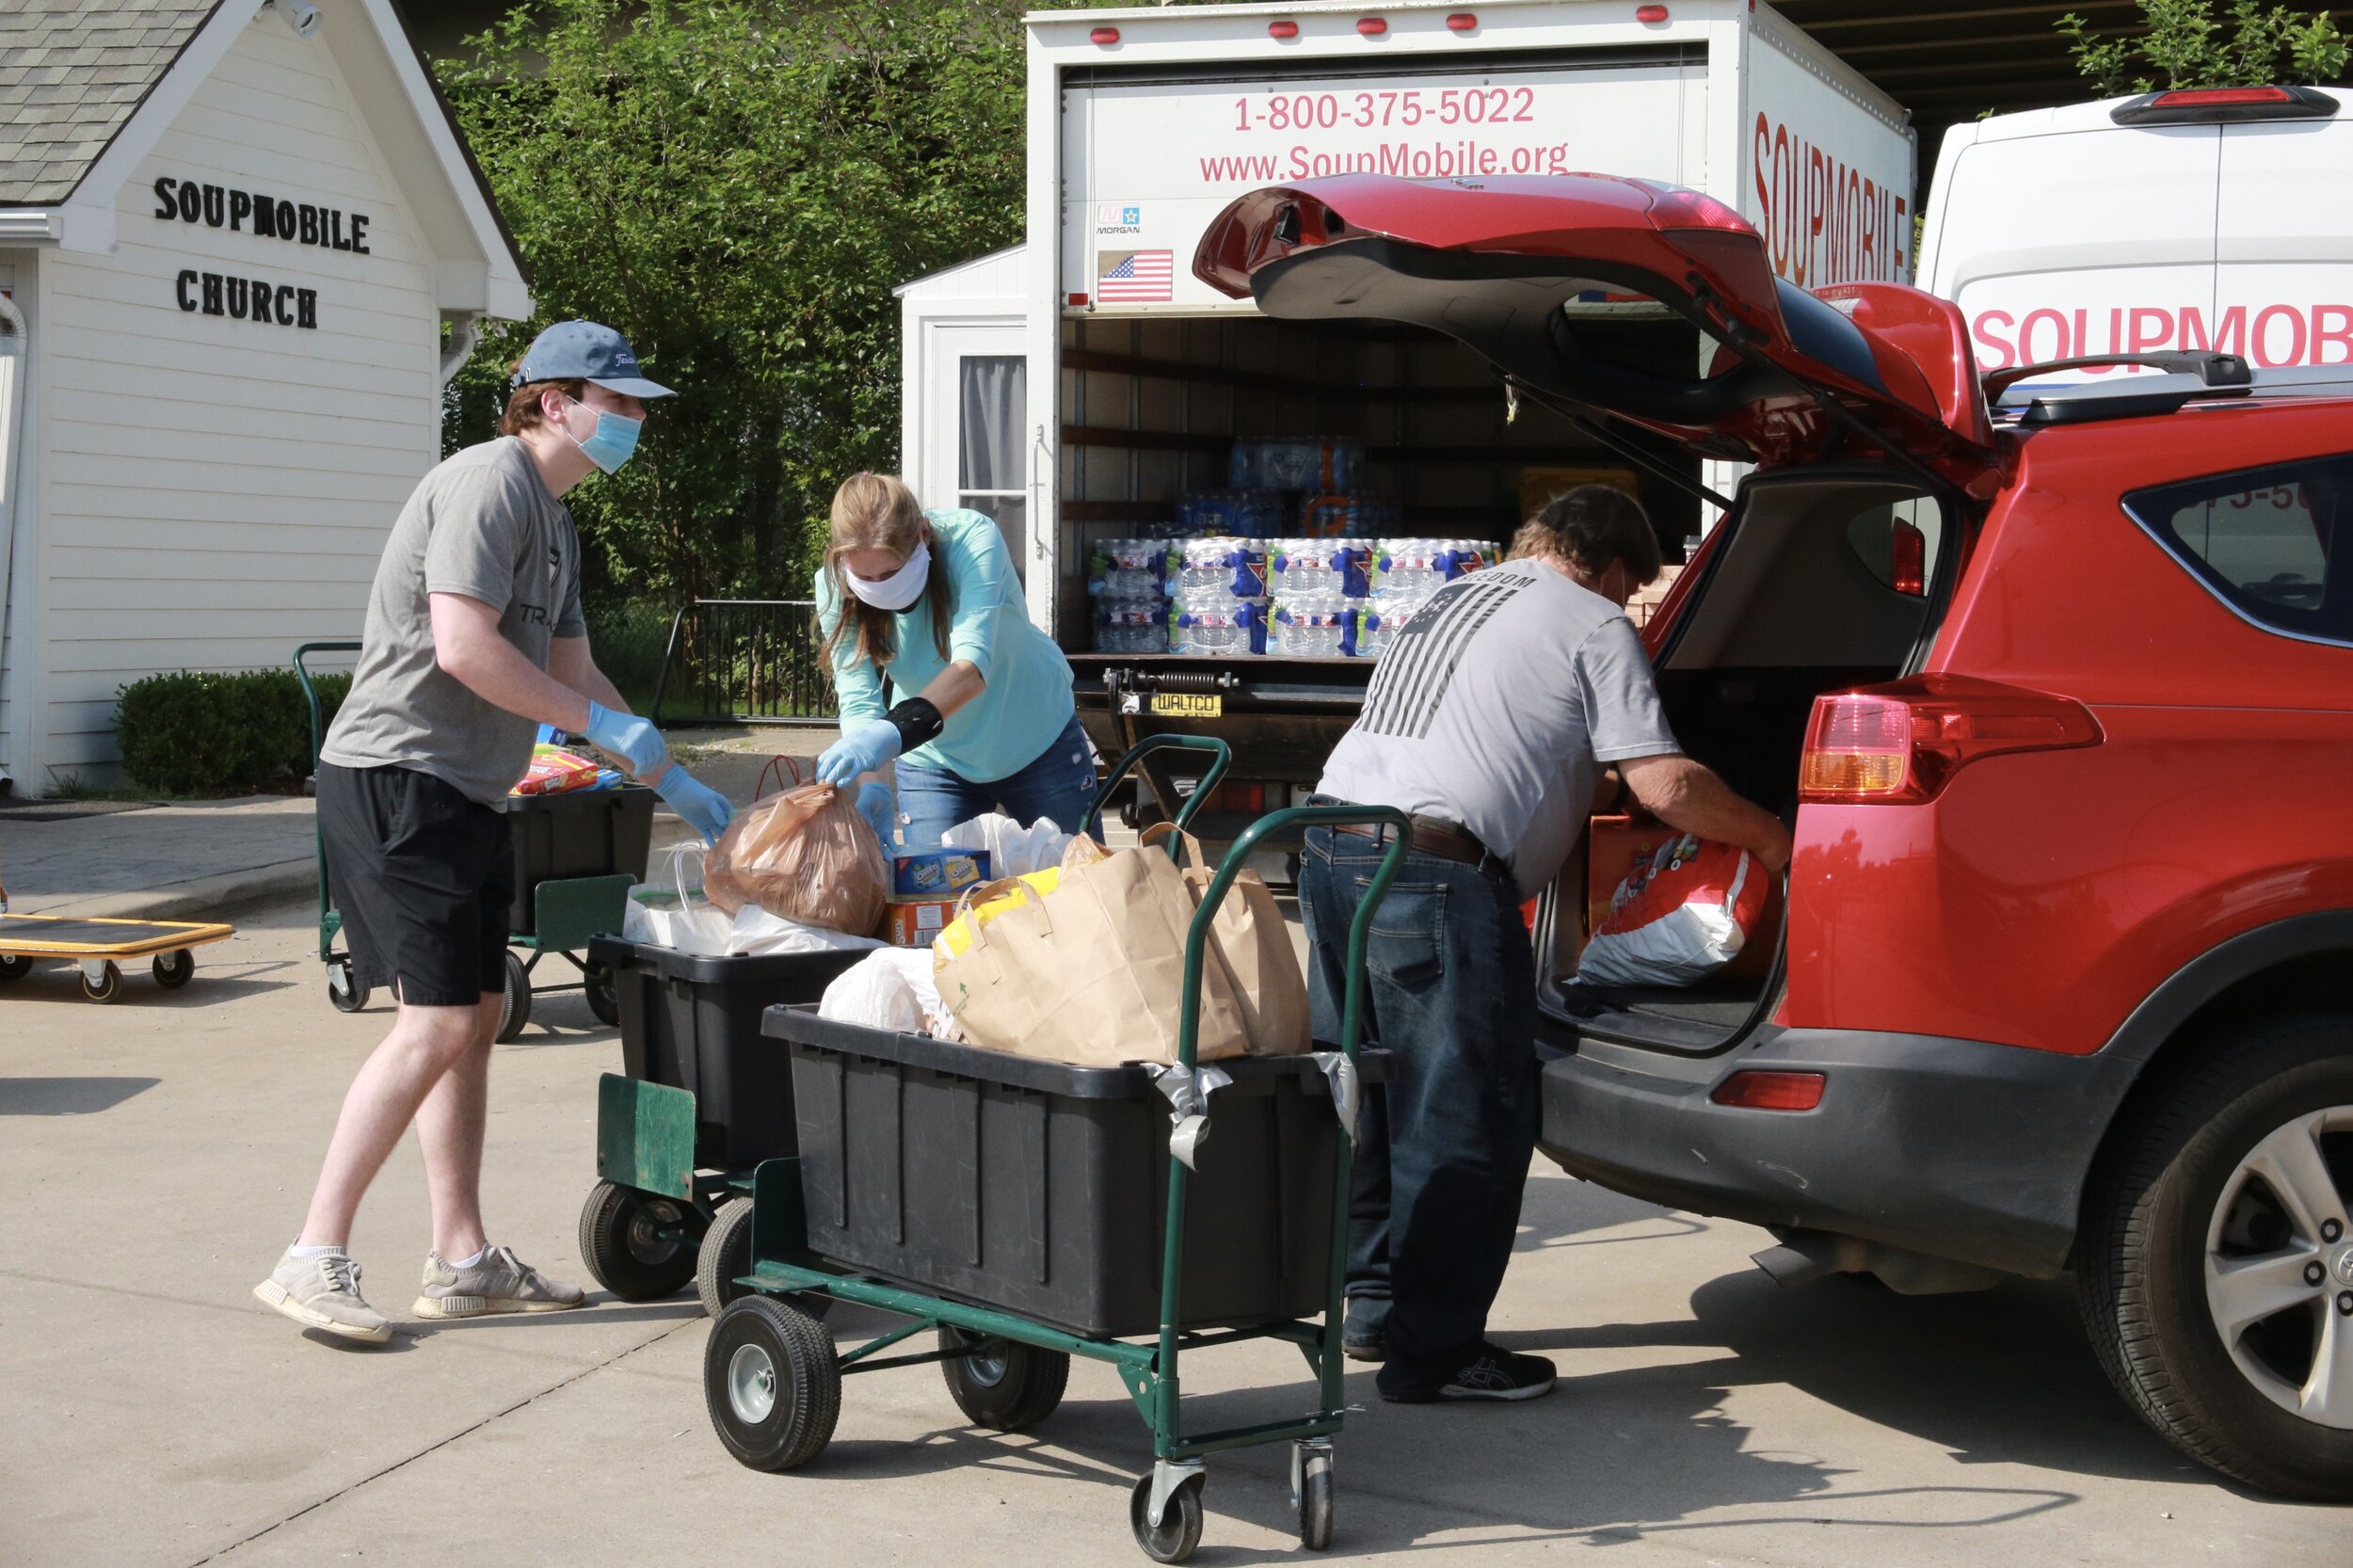 Christie Schmitt and her son, Ryan, delivered the food to The SoupMobile.